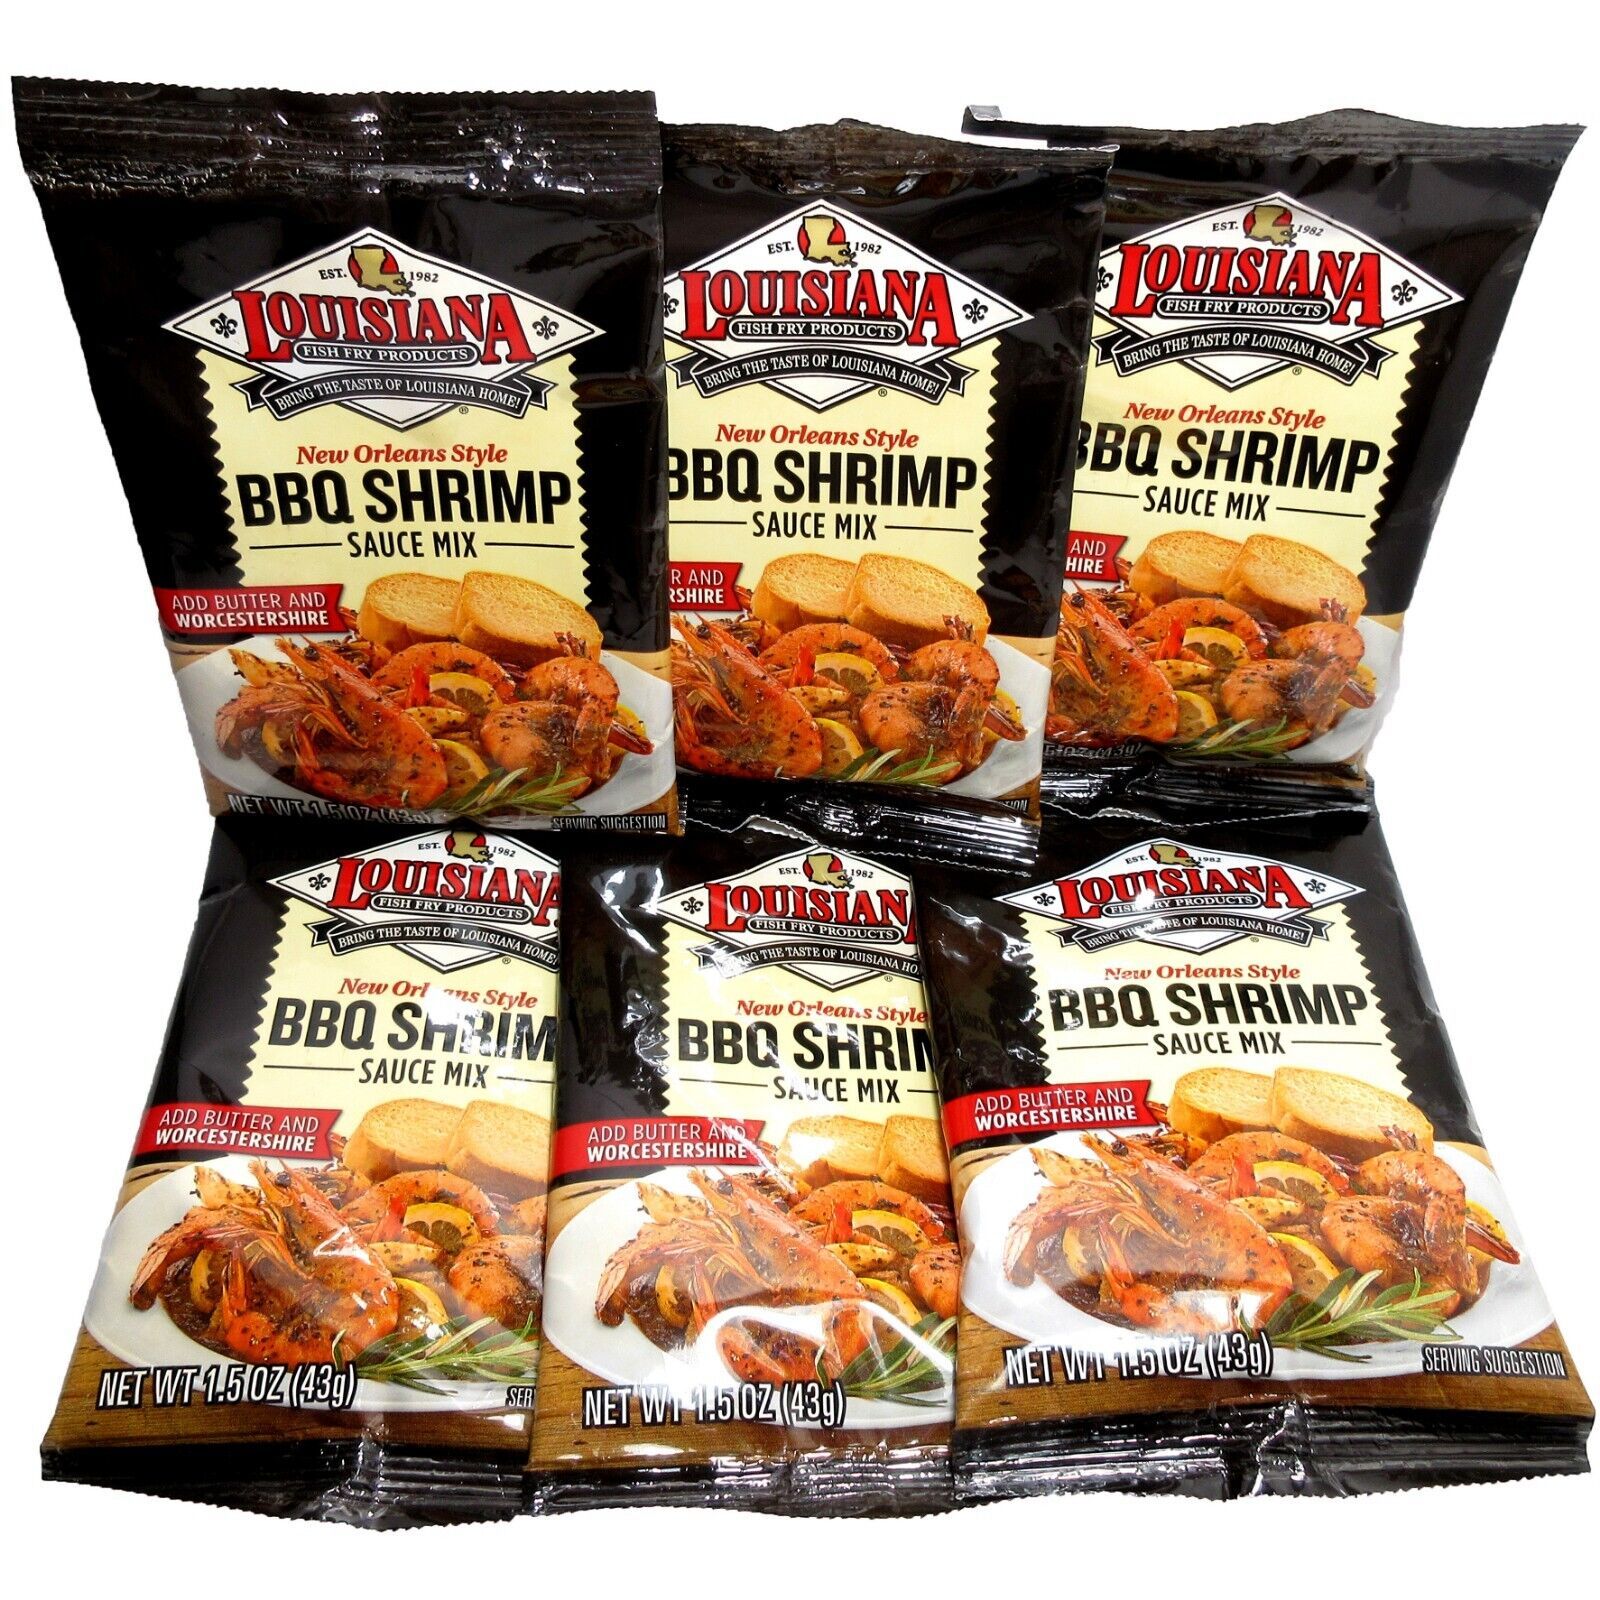 Primary image for (6) Louisiana Fish Fry New Orleans Style BBQ Shrimp Sauce Mix - 1.5 oz each